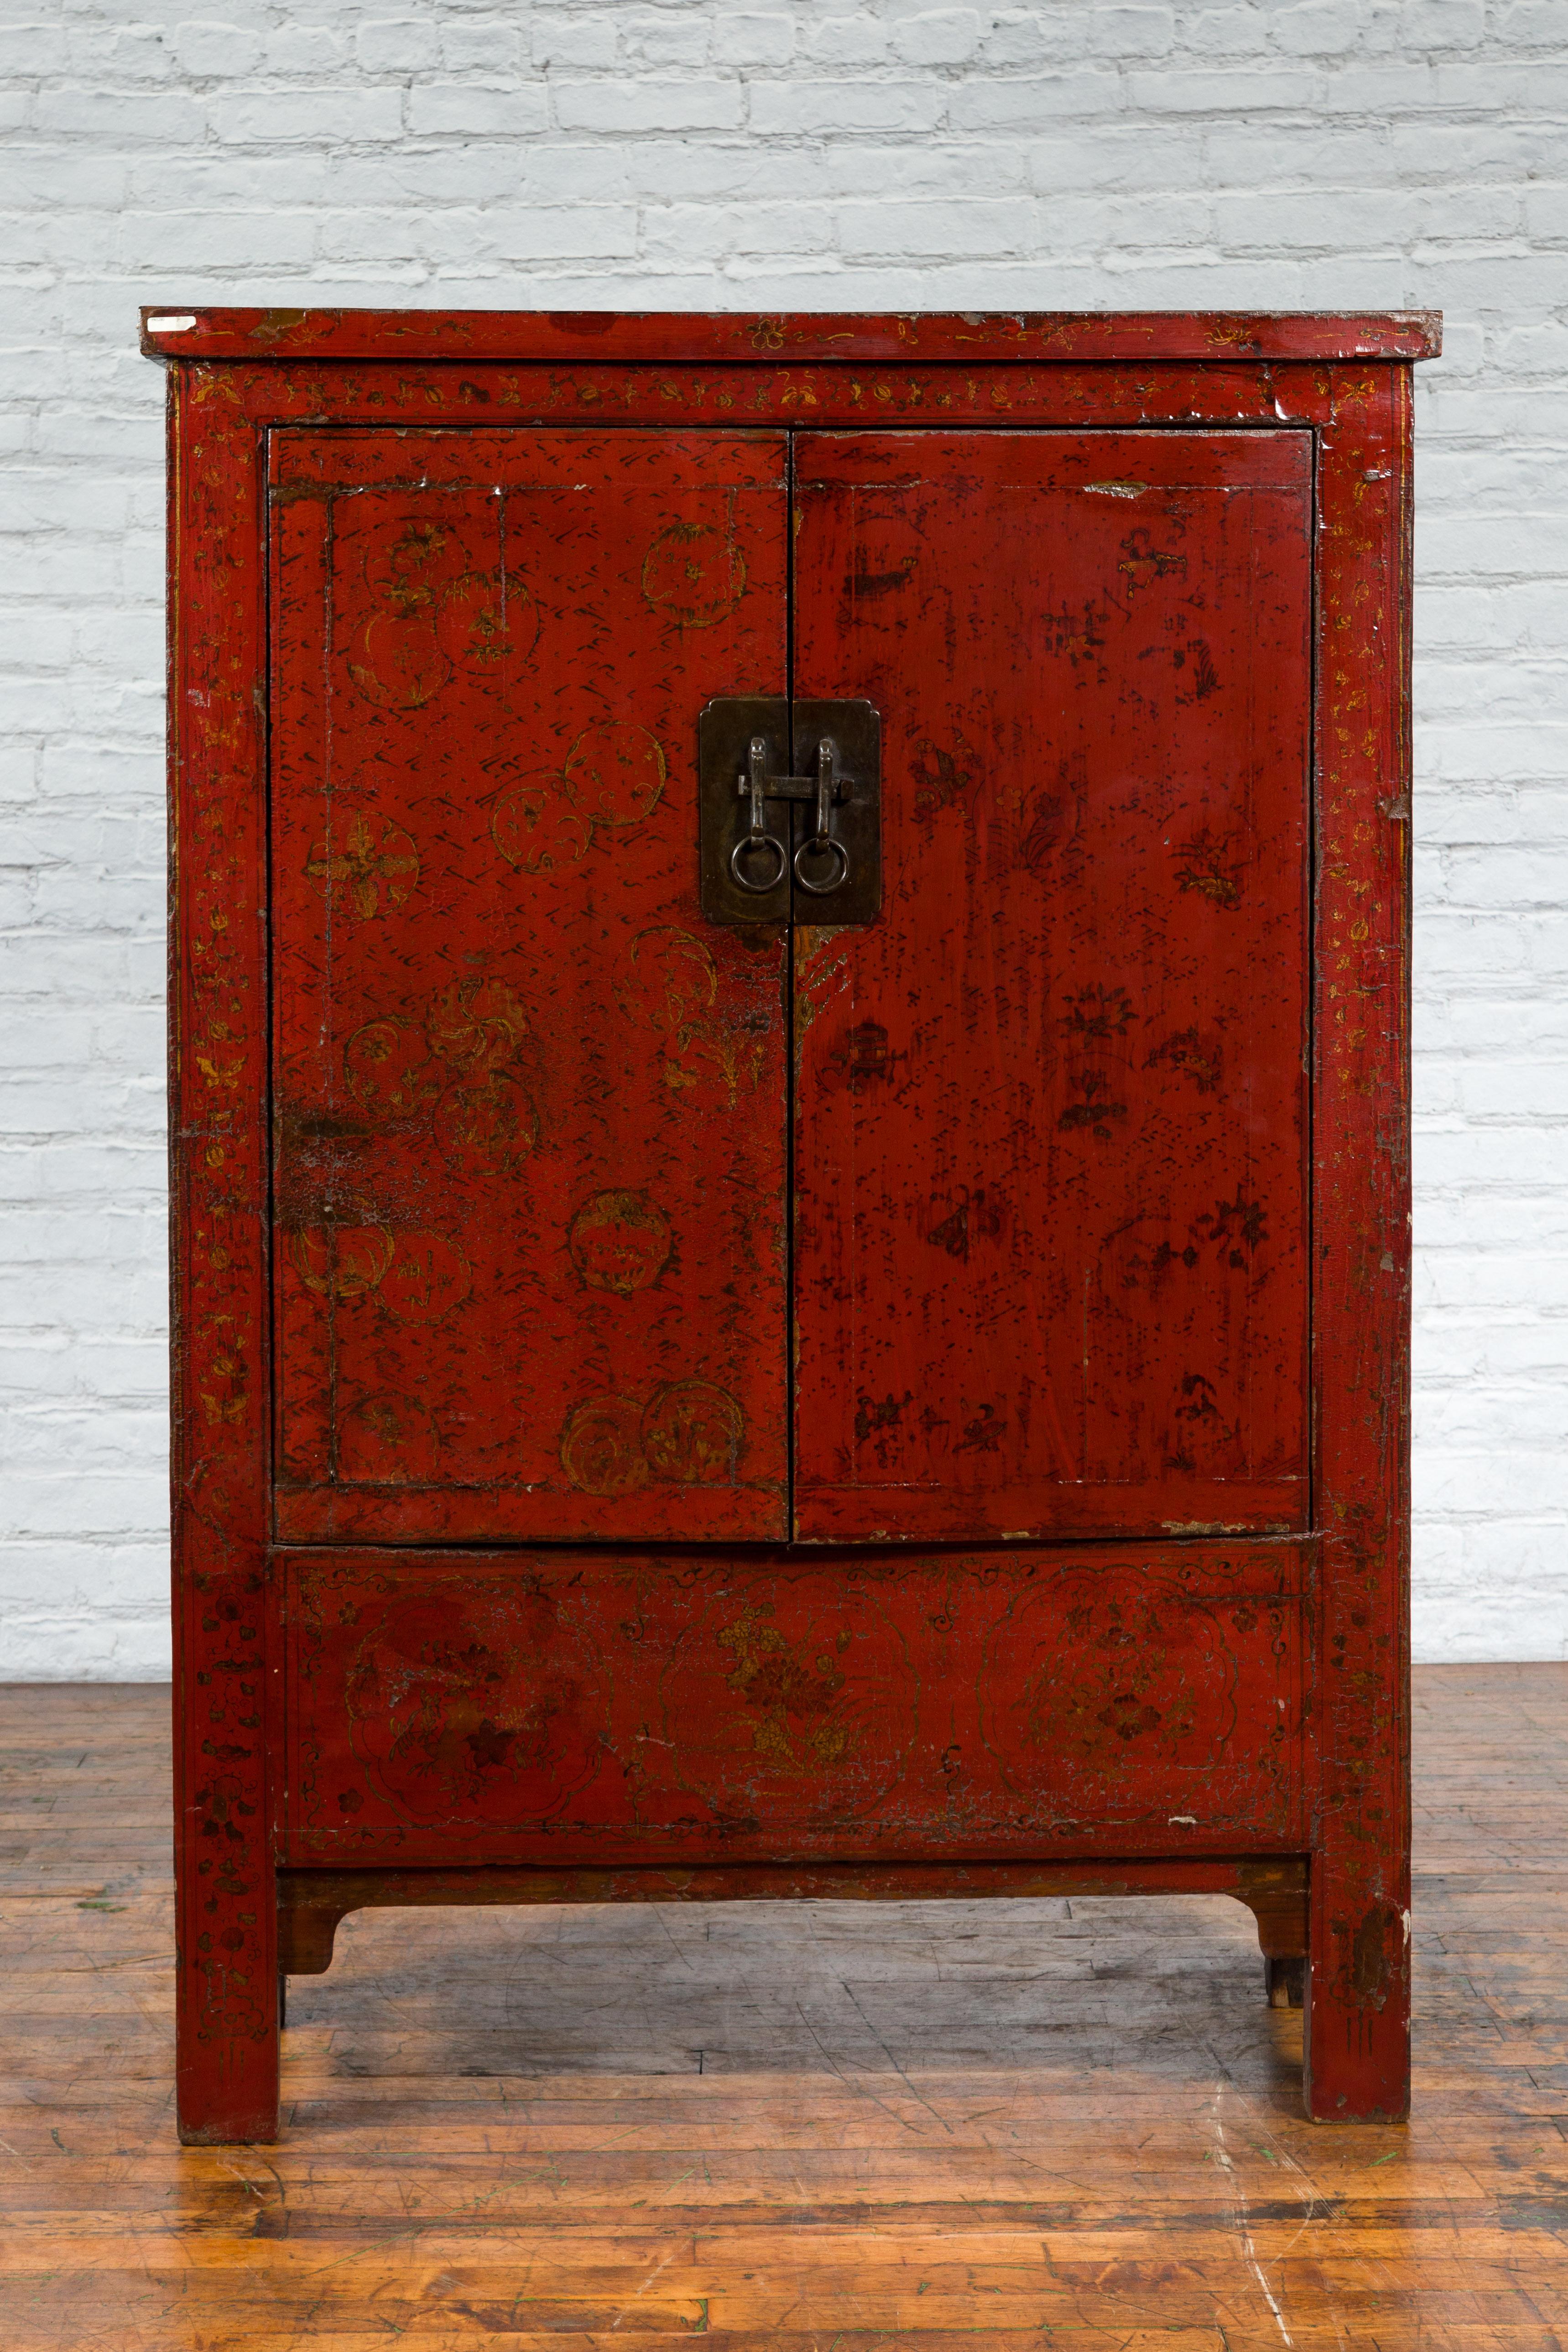 A Chinese Qing Dynasty period Shanxi cabinet from the 19th century with original red lacquer and floral décor. Created in the North-Eastern province of Shanxi during the Qing dynasty, this 19th century cabinet features a linear silhouette perfectly